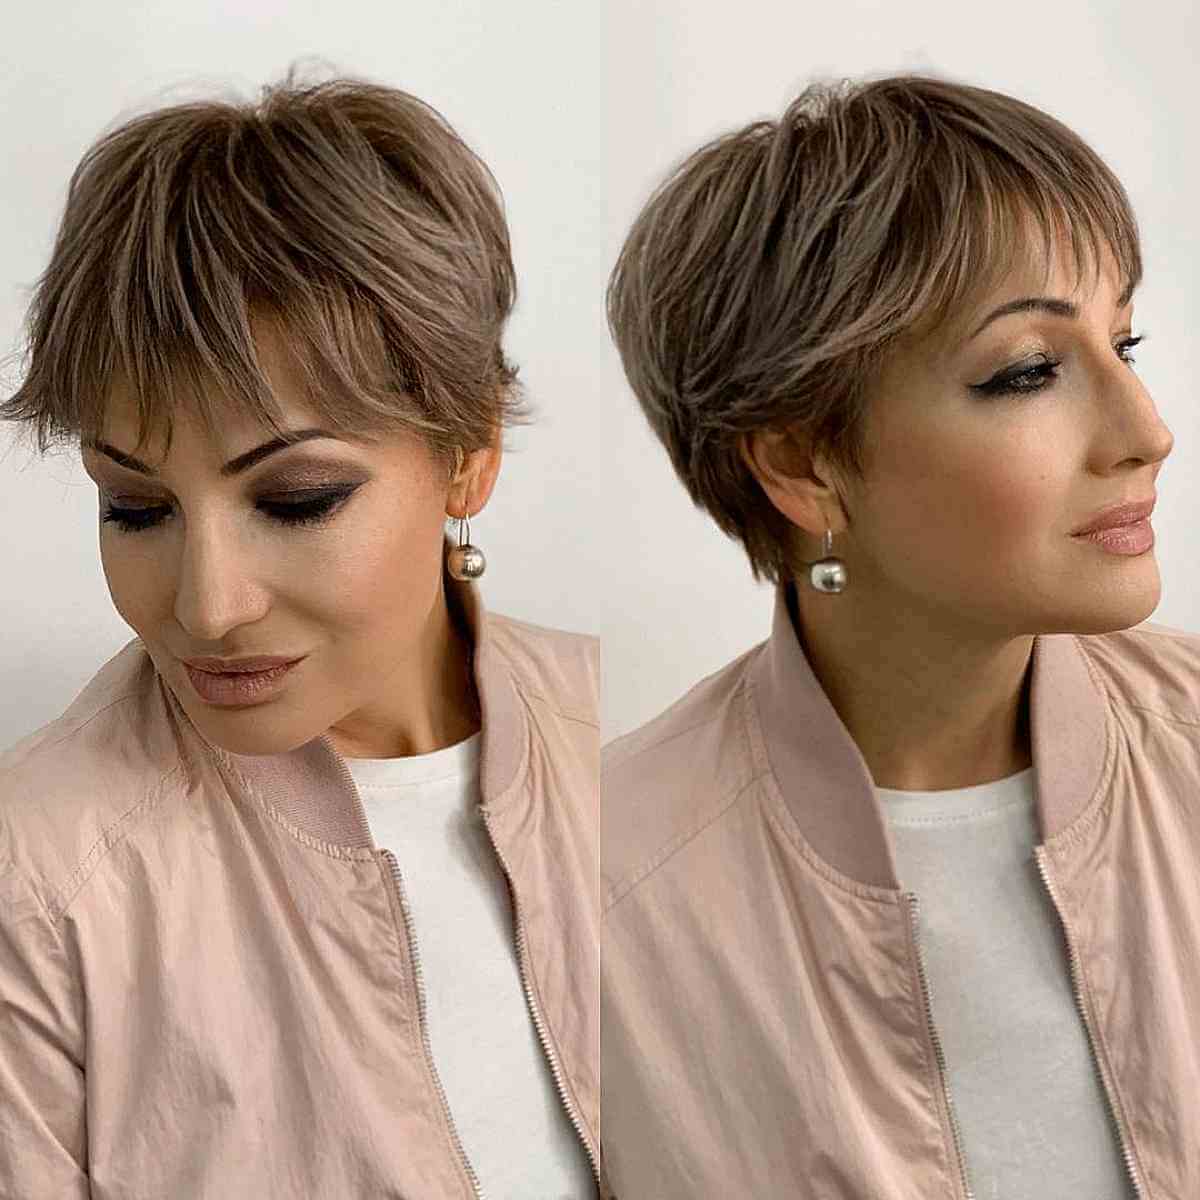 Ash Light Brown on Short Feathered Pixie Hair